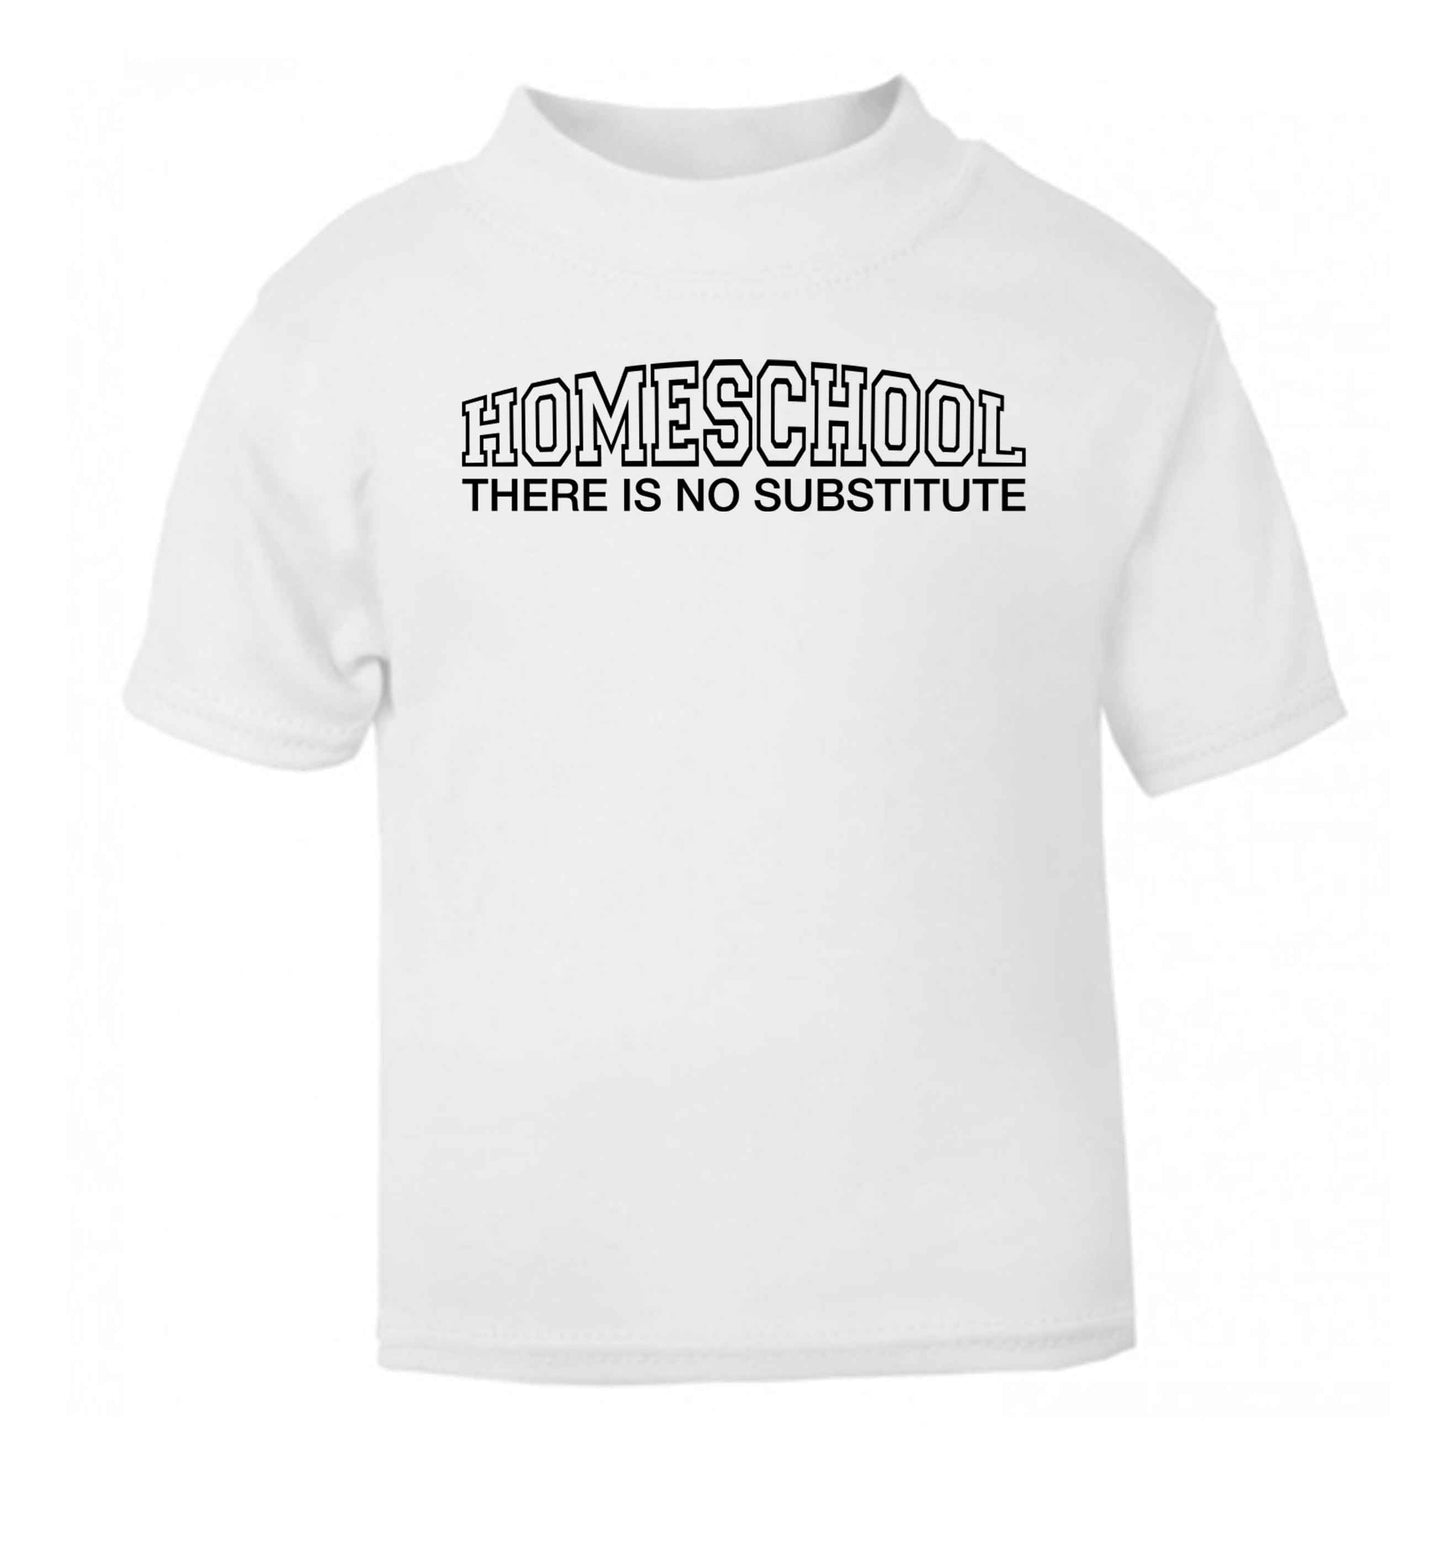 Homeschool there is not substitute white Baby Toddler Tshirt 2 Years